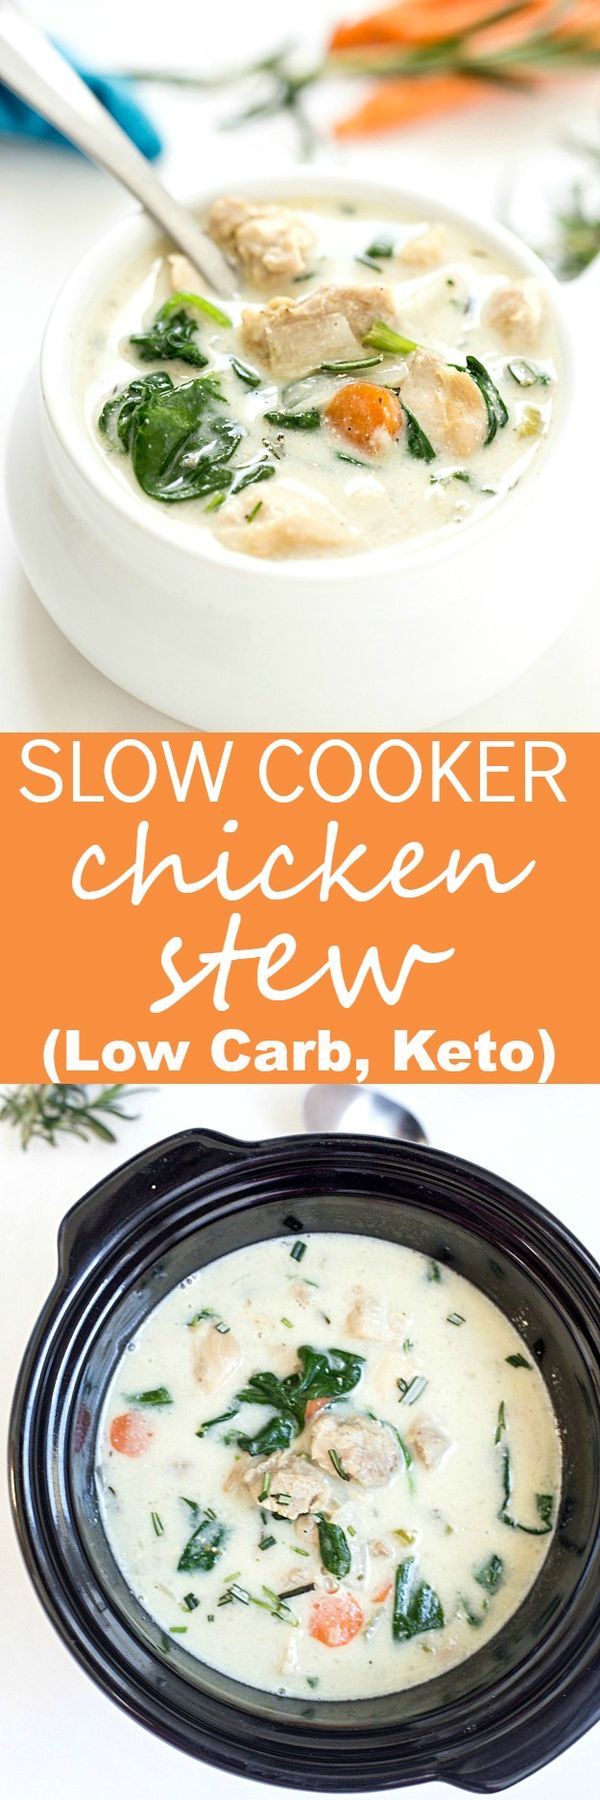 Easy Crockpot Chicken Stew (Low Carb, Keto